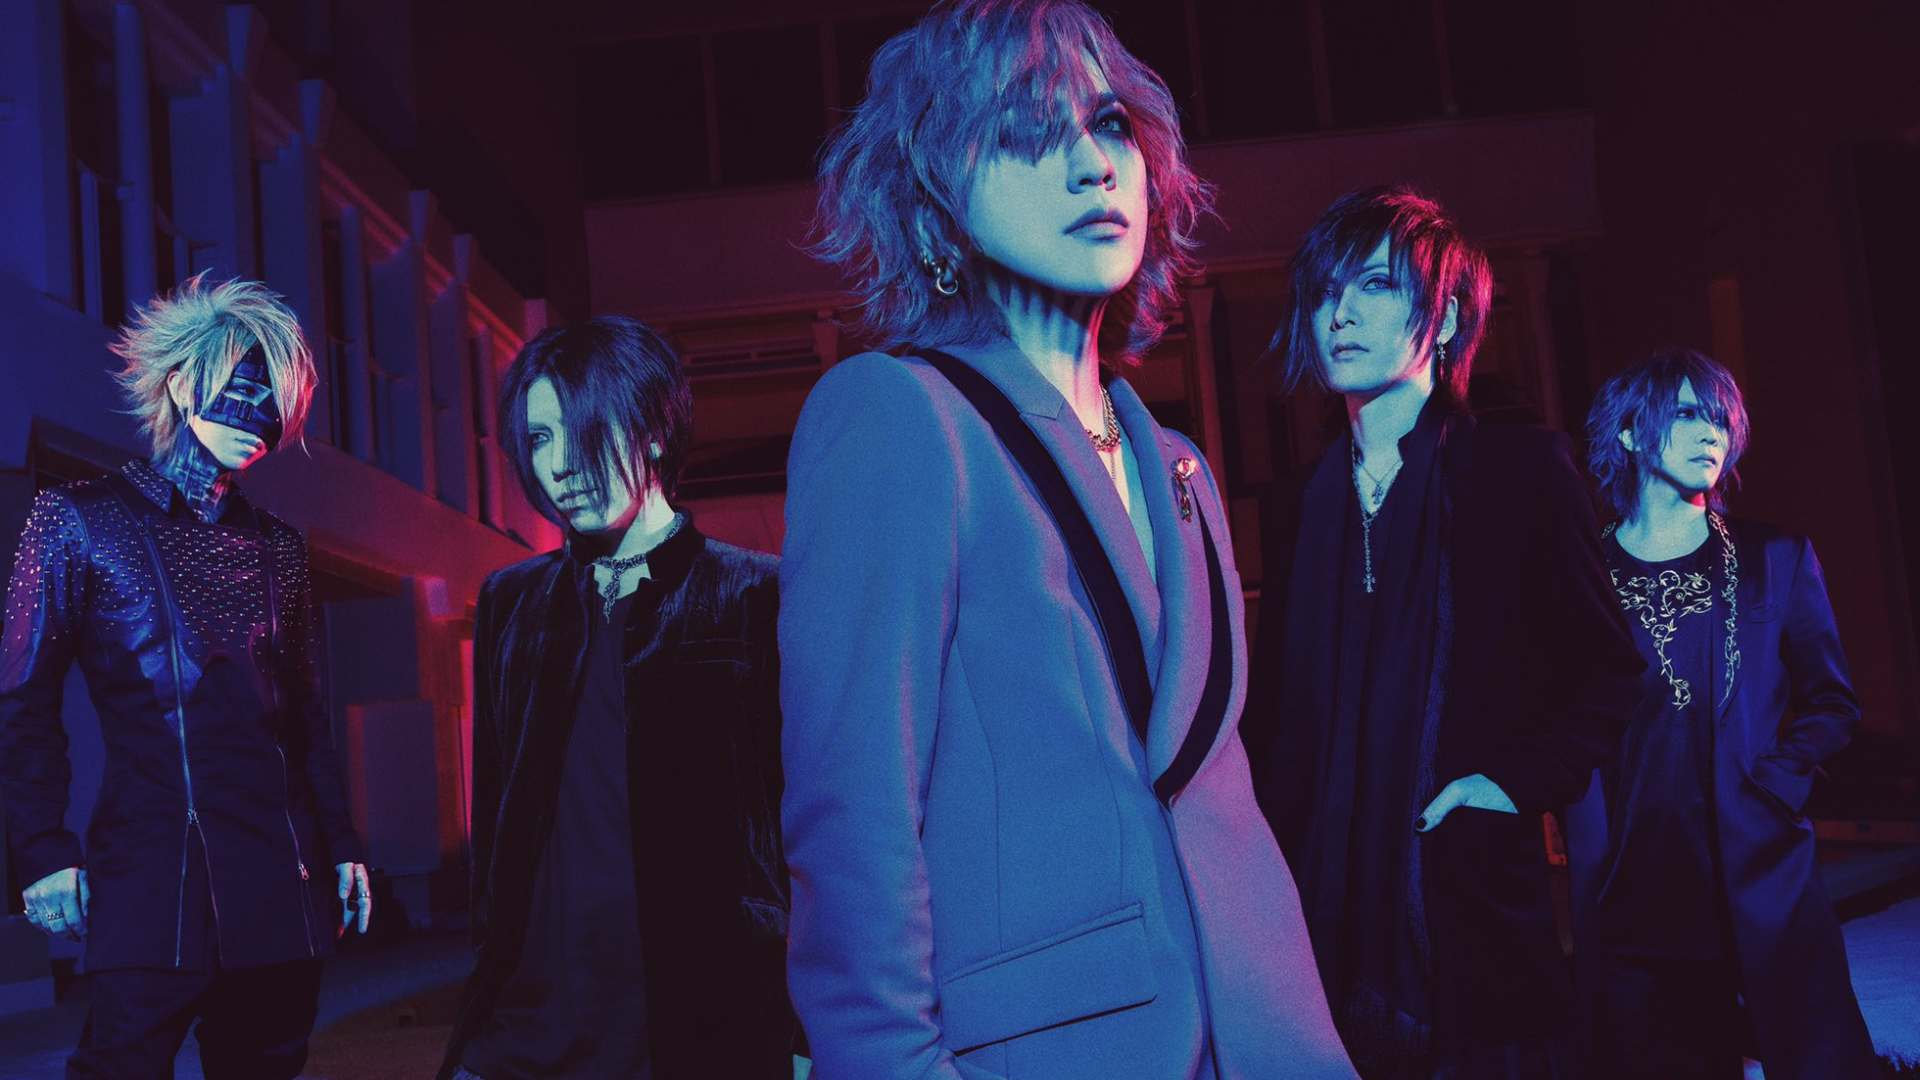 <p>The same report from JRock News states that Reita had even tweeted: “I hope the GazettE will last forever” earlier on the same day on April 15, promoting the band’s upcoming activities and material.</p> <p>Image: Sony Music</p>